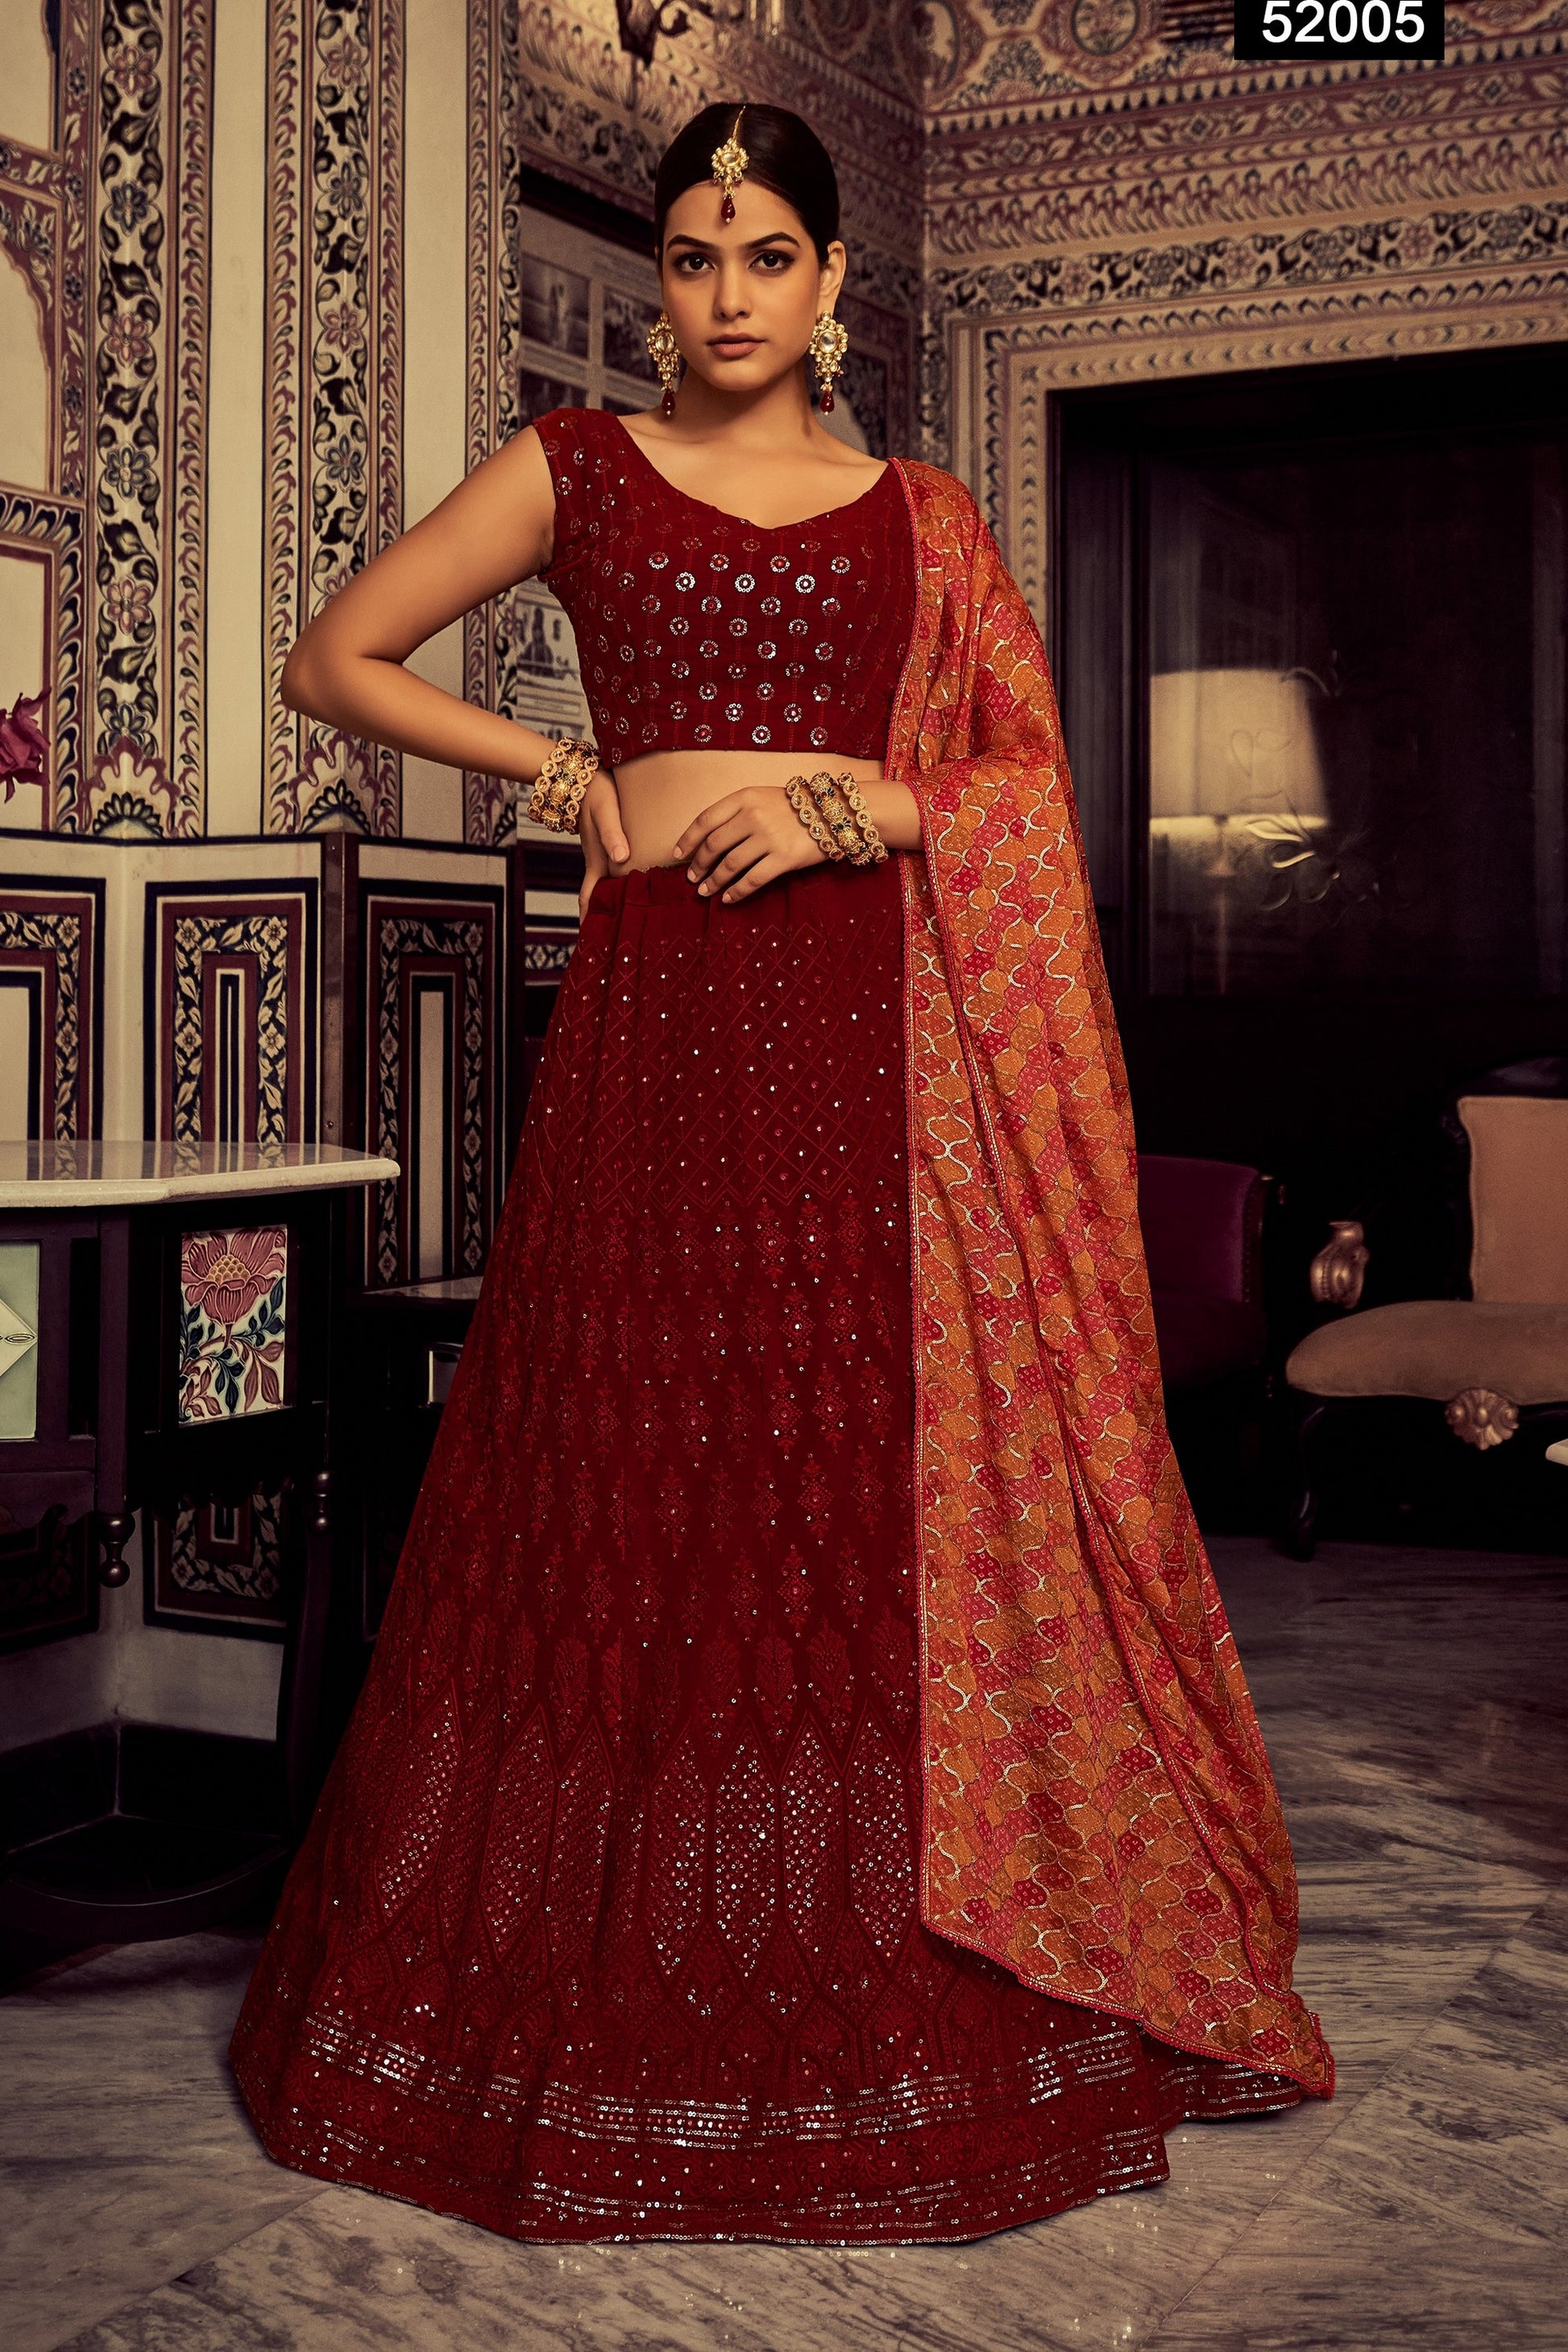 Dark Red Pakistani Georgette Lehenga Choli For Indian Festivals & Weddings - Sequence Embroidery Work, Thread Embroidery Work,